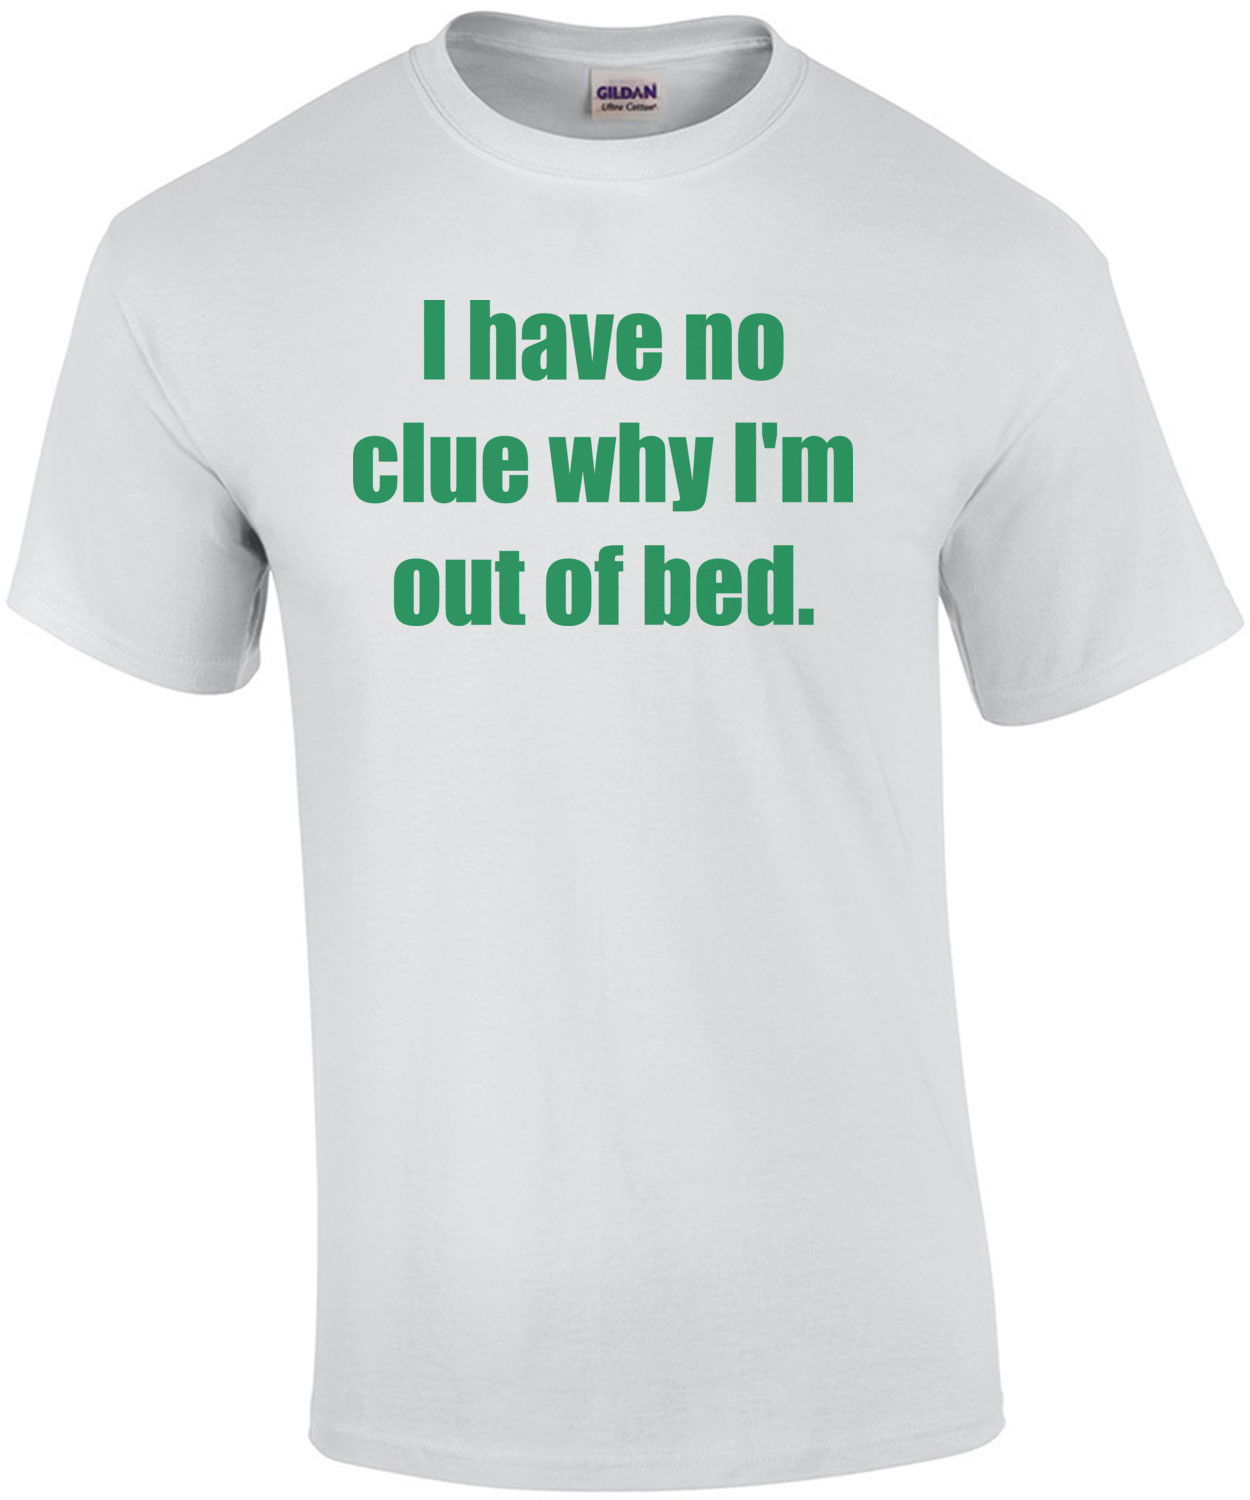 I have no clue why I'm out of bed. T-Shirt